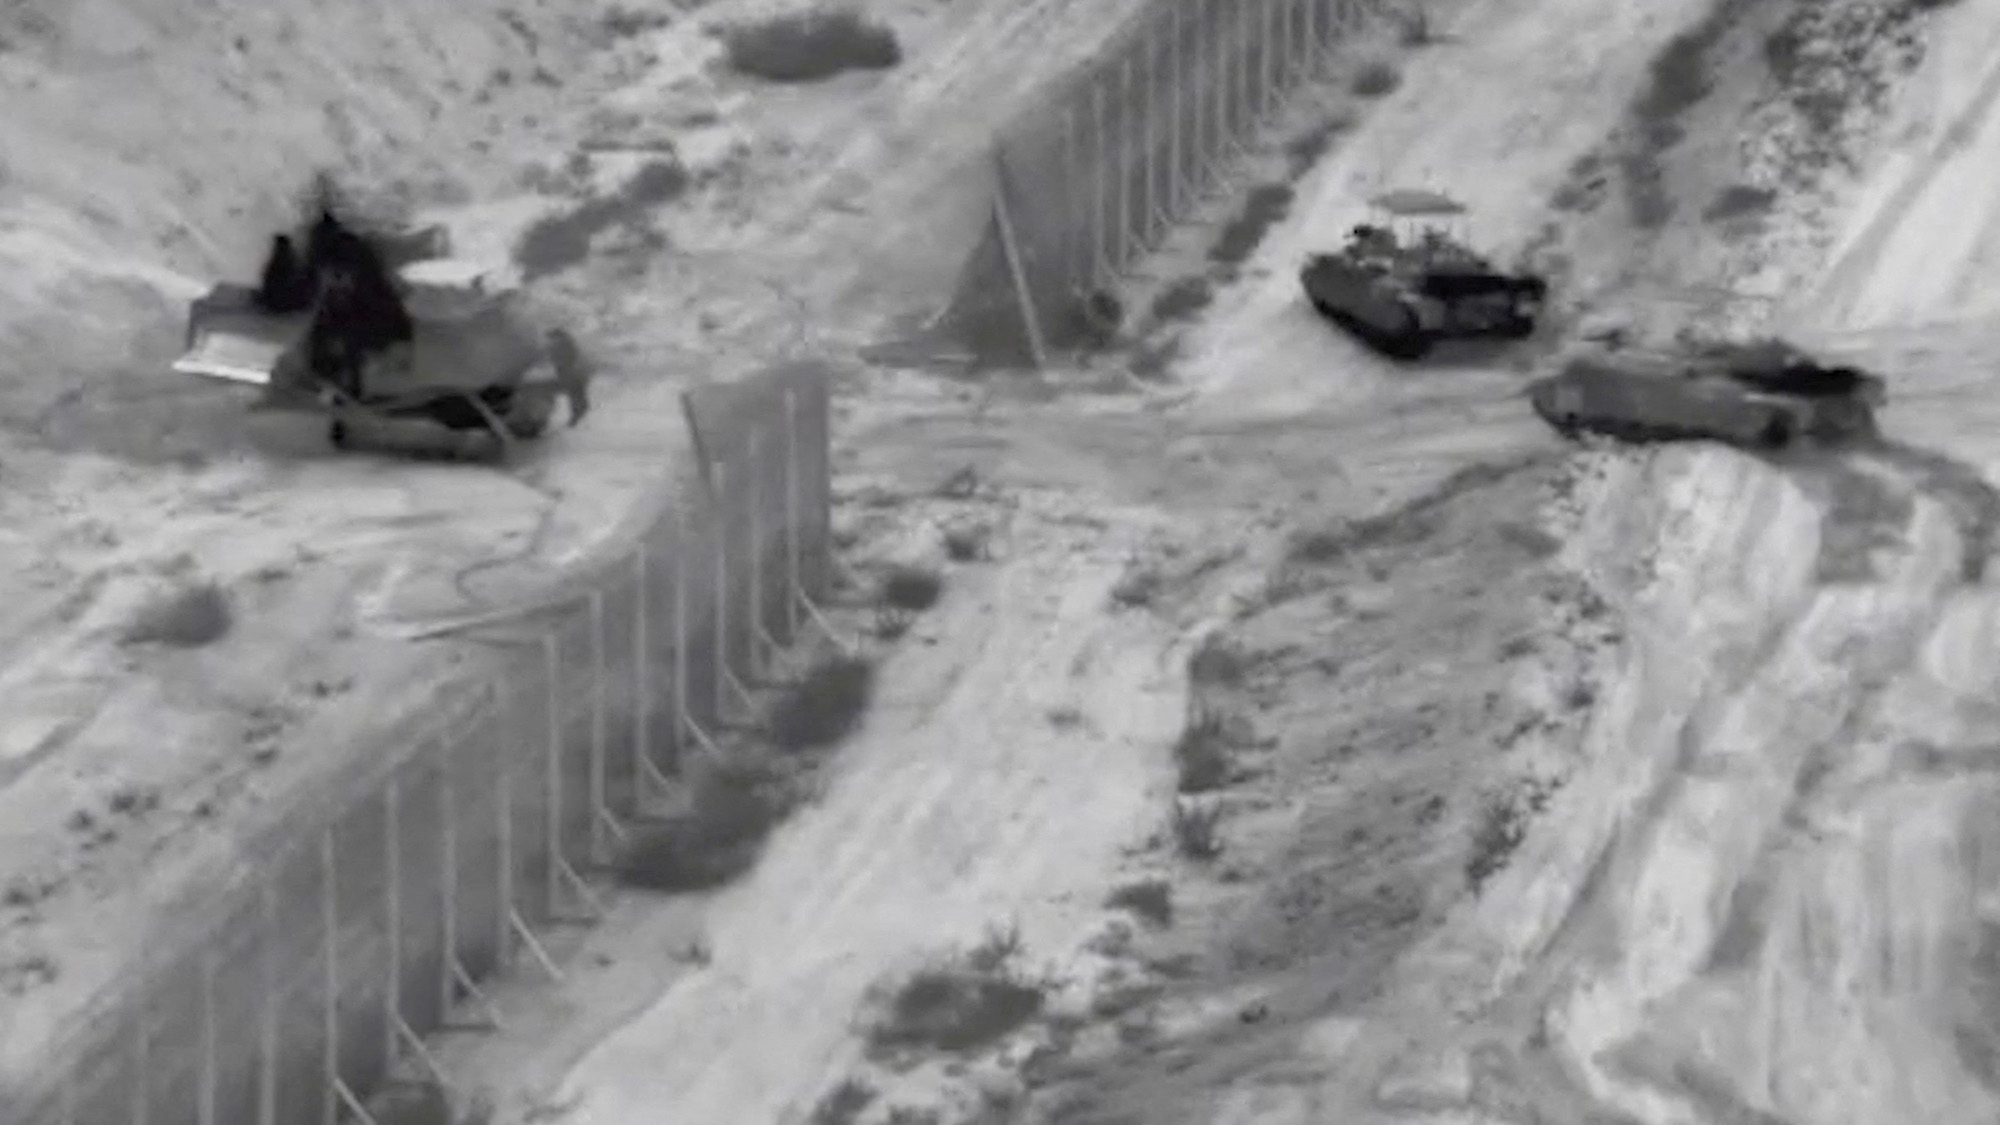 Israeli armored vehicles take part in an operation at a location given as northern Gaza in this still image taken from handout video released on October 26.